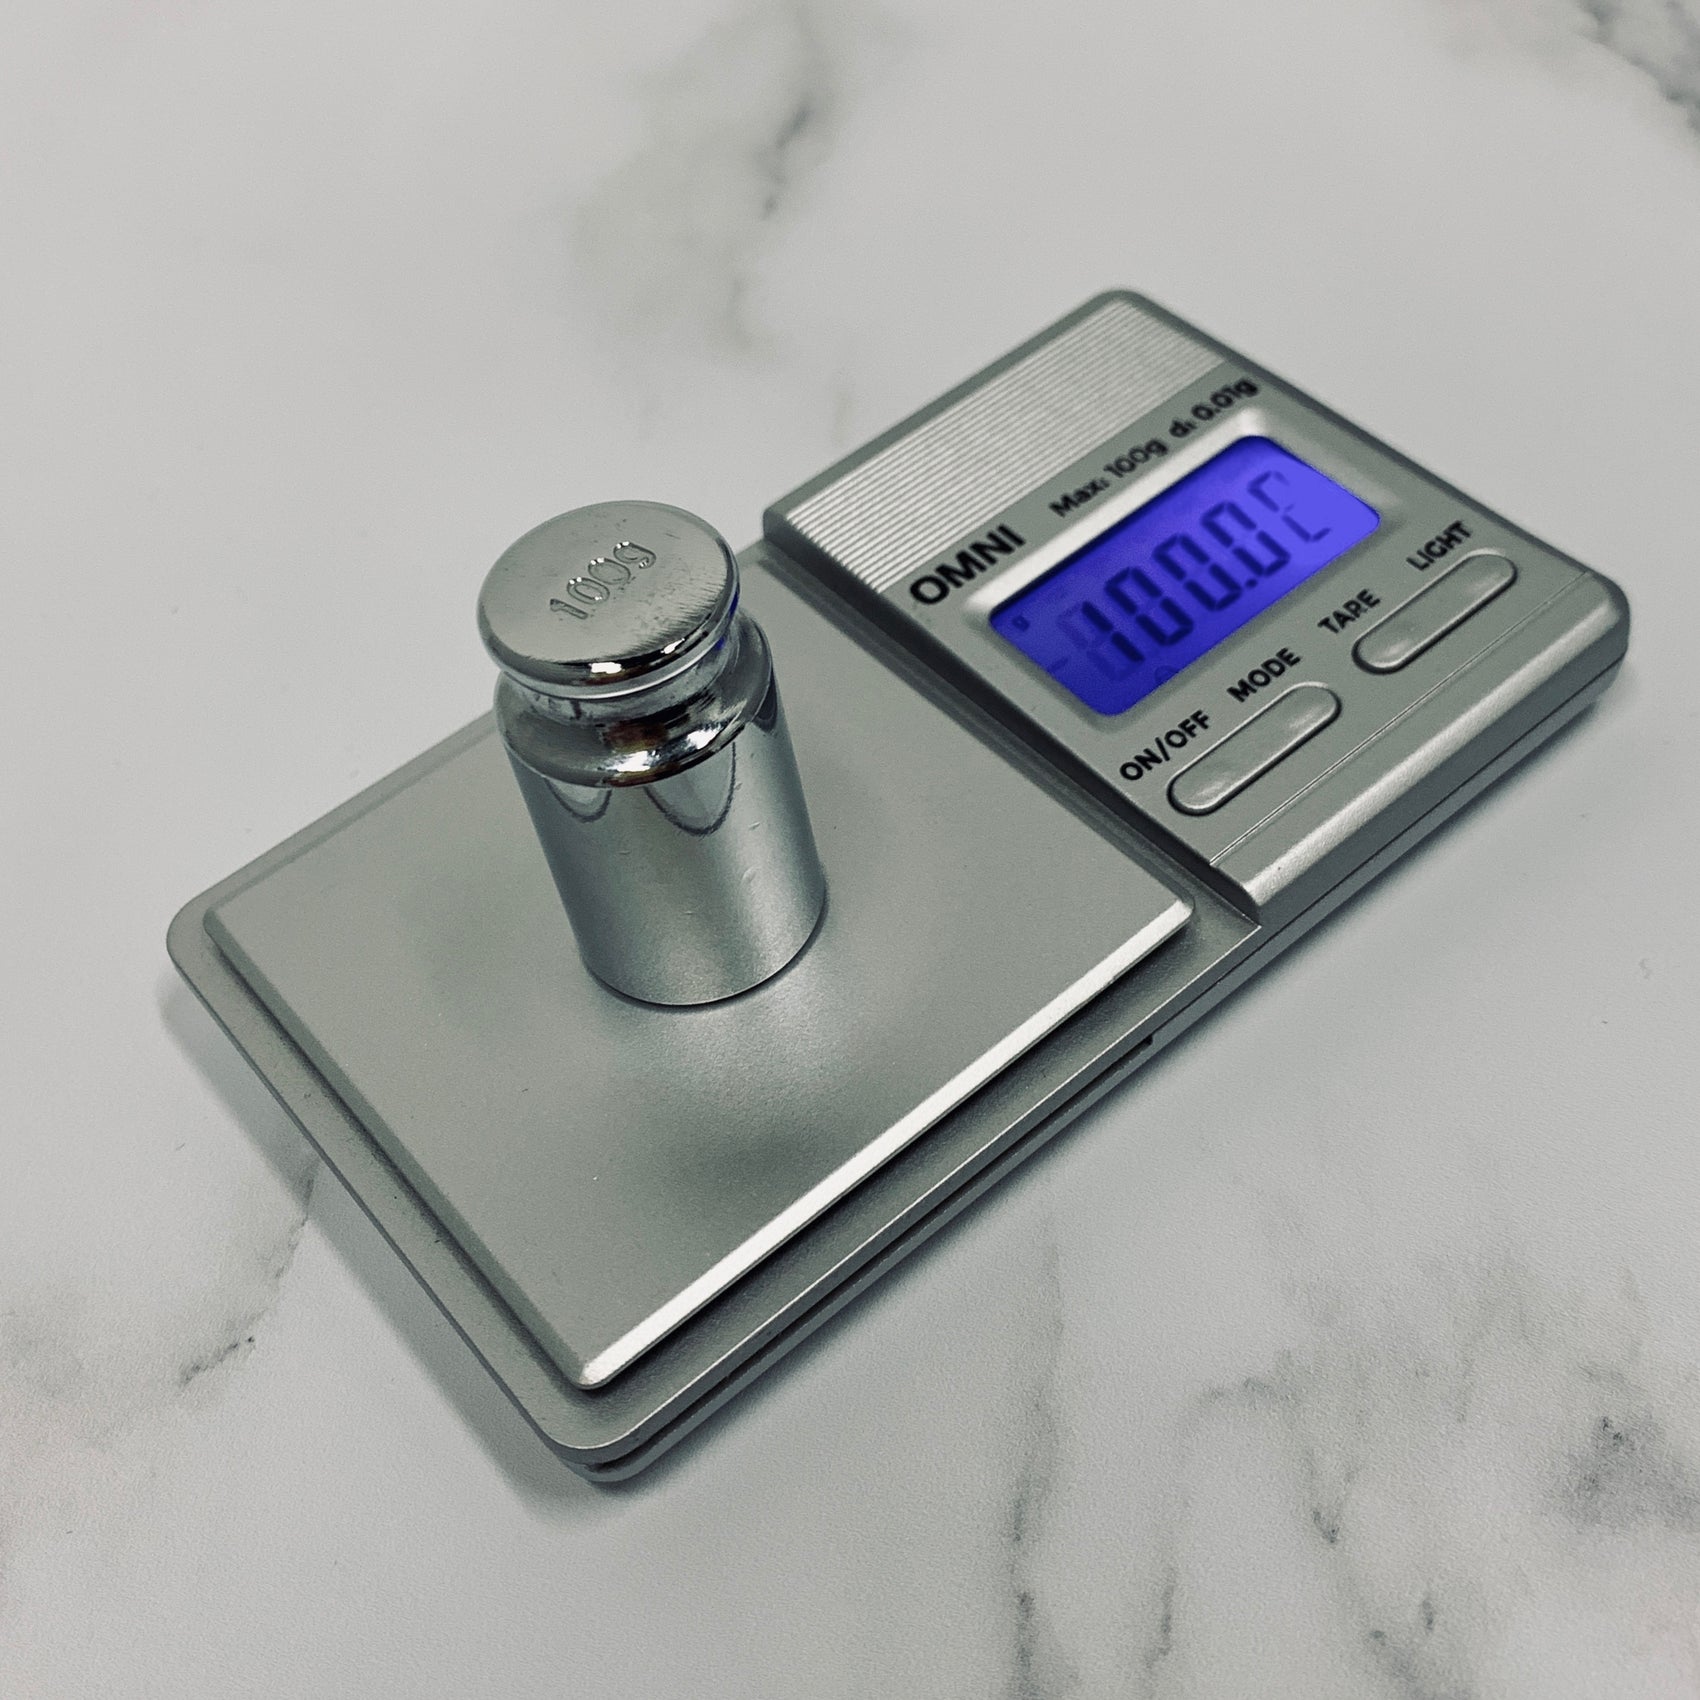 The Truweigh Omni Digital scale sits on a white marble background and is being calibrated with a 100g chrome calibration weight. The blue back-lit screen reads 100.00g.